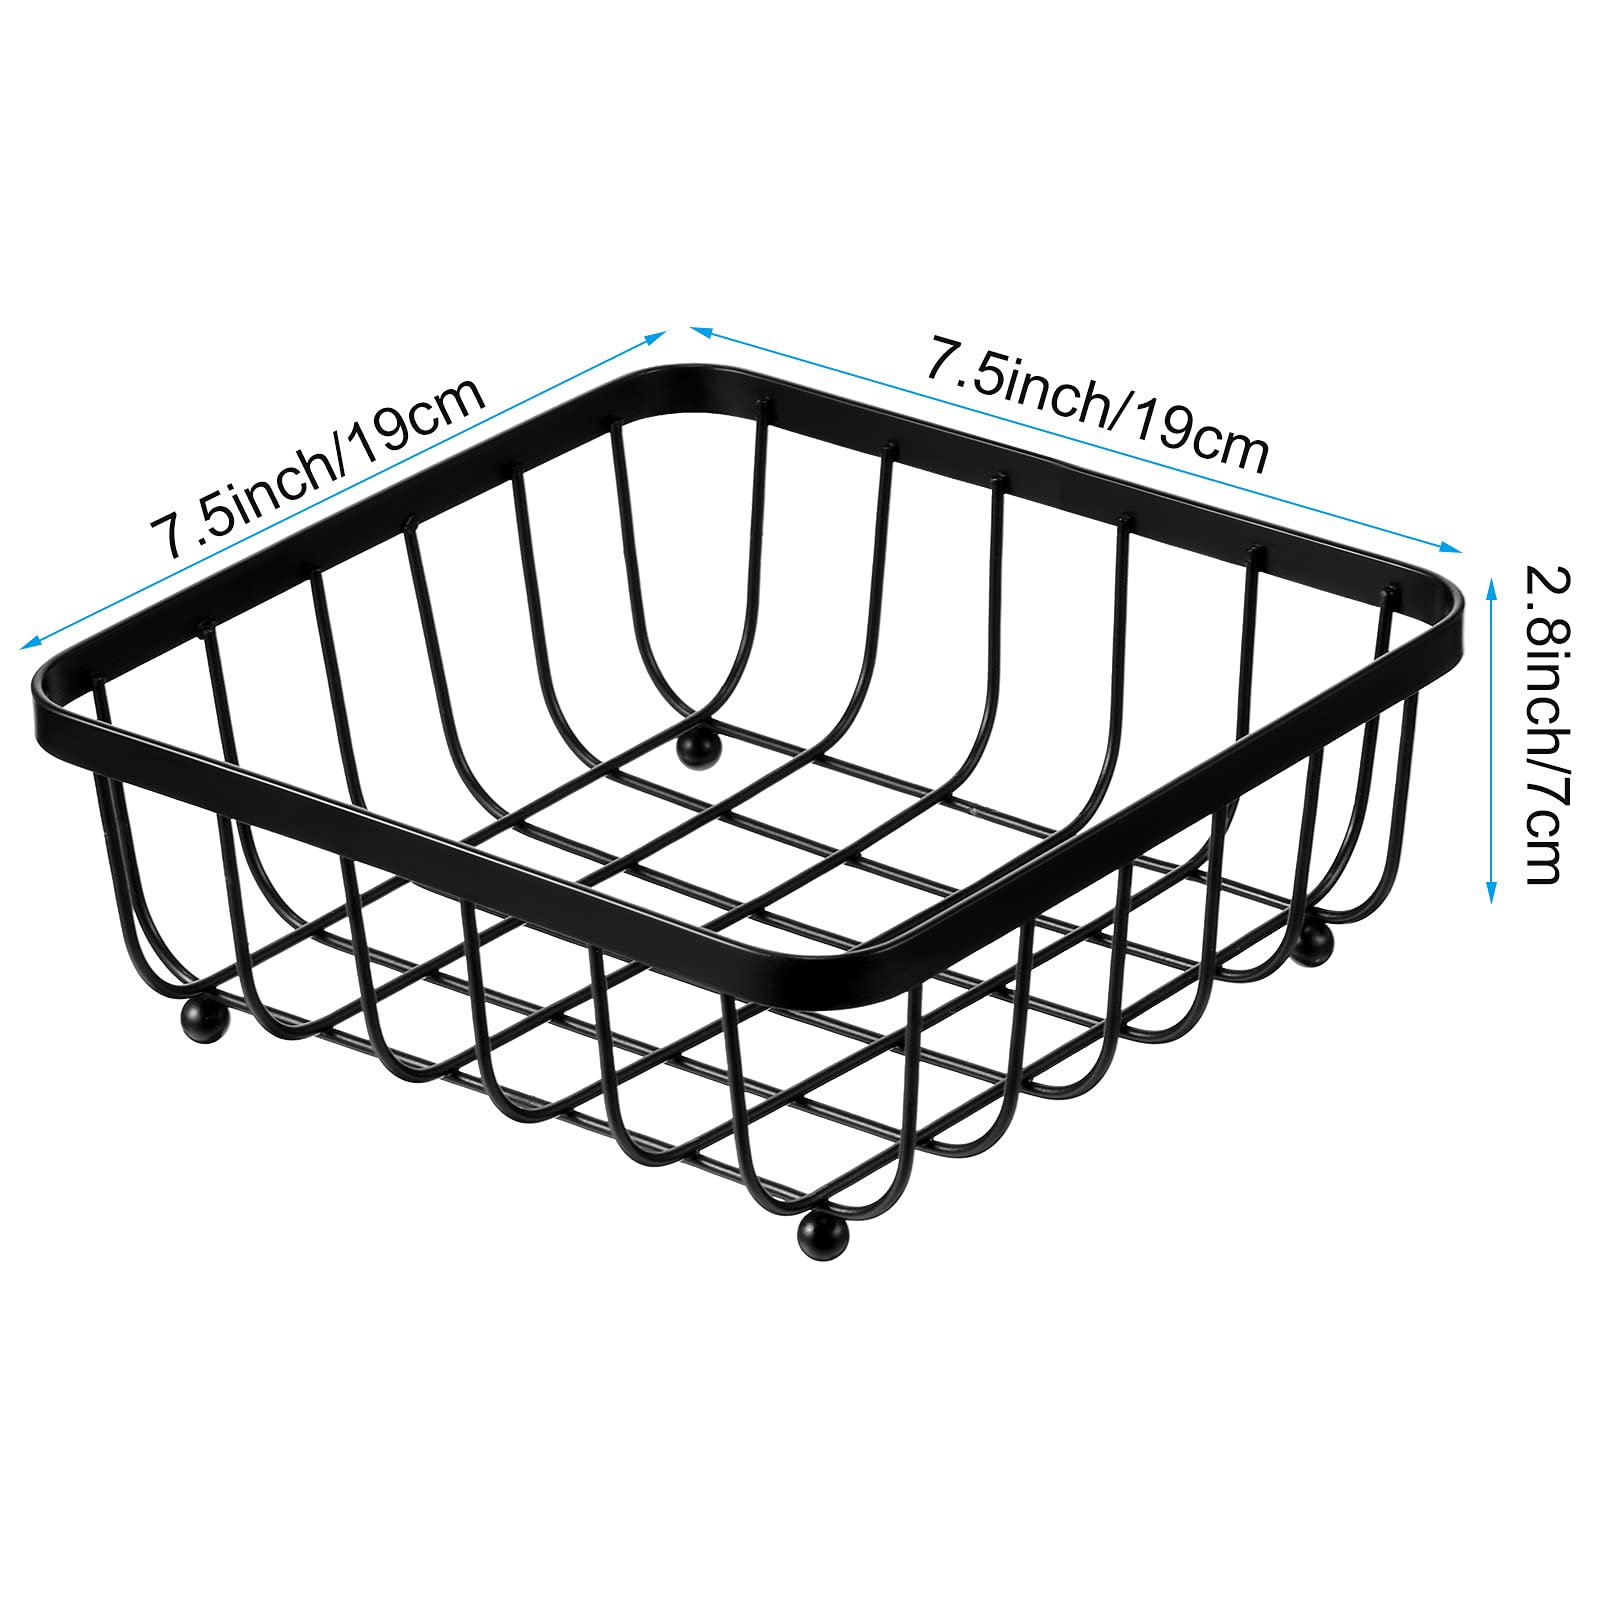 Hotop, 2 Pieces Metal Napkin Holder Metal Paper Napkin Holder Napkin Storage Holder Rack for Dining Table, Kitchen, Coffee Table, Black, approx. 7.5 x 7.5 x 3 In 19 x 19 x 7 cm